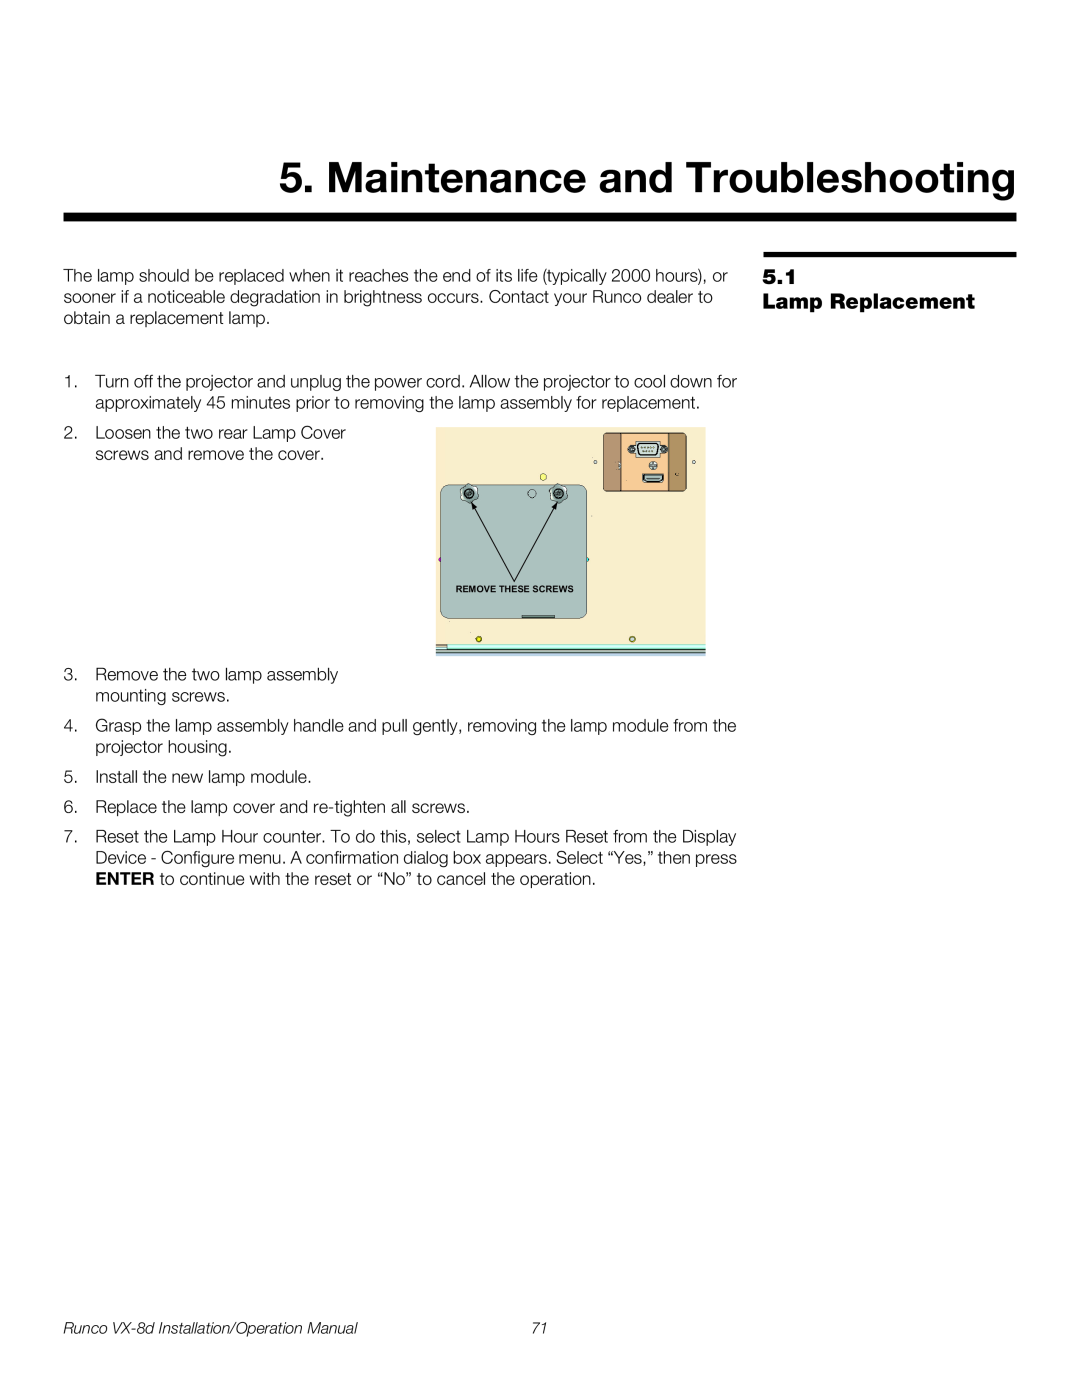 Runco VX-8D operation manual Maintenance and Troubleshooting, Lamp Replacement 